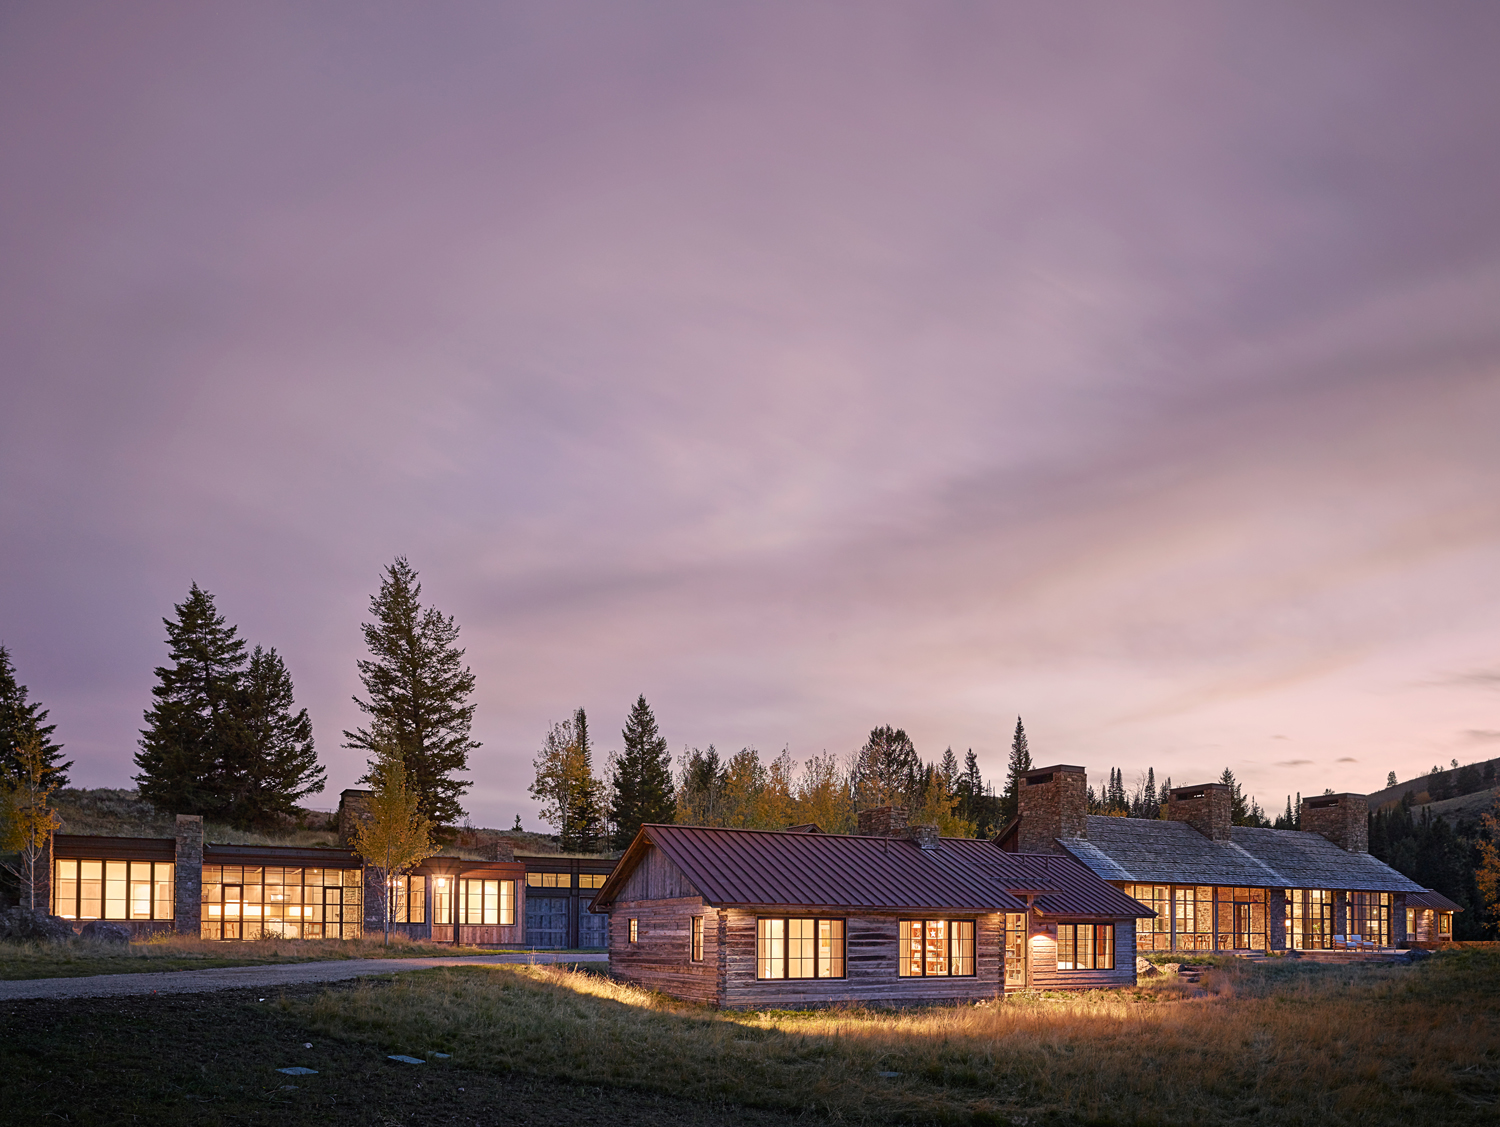 The WRJ Design interiors of the award-winning home, constructed near Jackson, Wyoming, by architect/contractor team JLF Design Build, juxtapose sleek contemporary with rustic timber and stone.